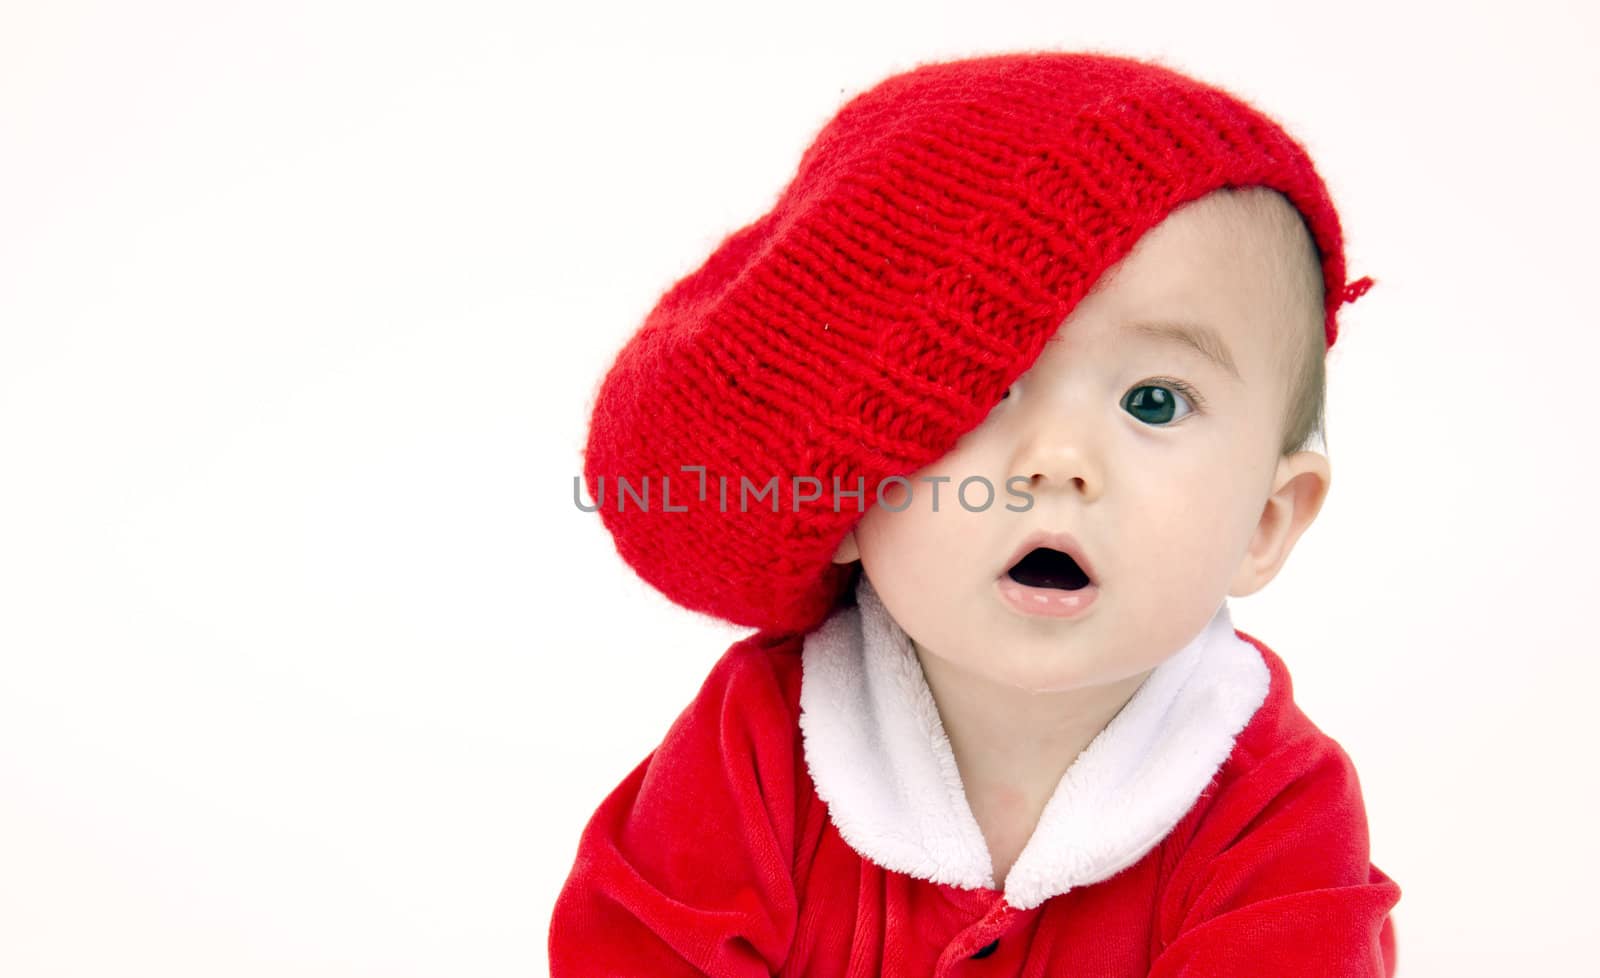 Infant Boy Sits lOOKING under his red hat by ChrisBoswell